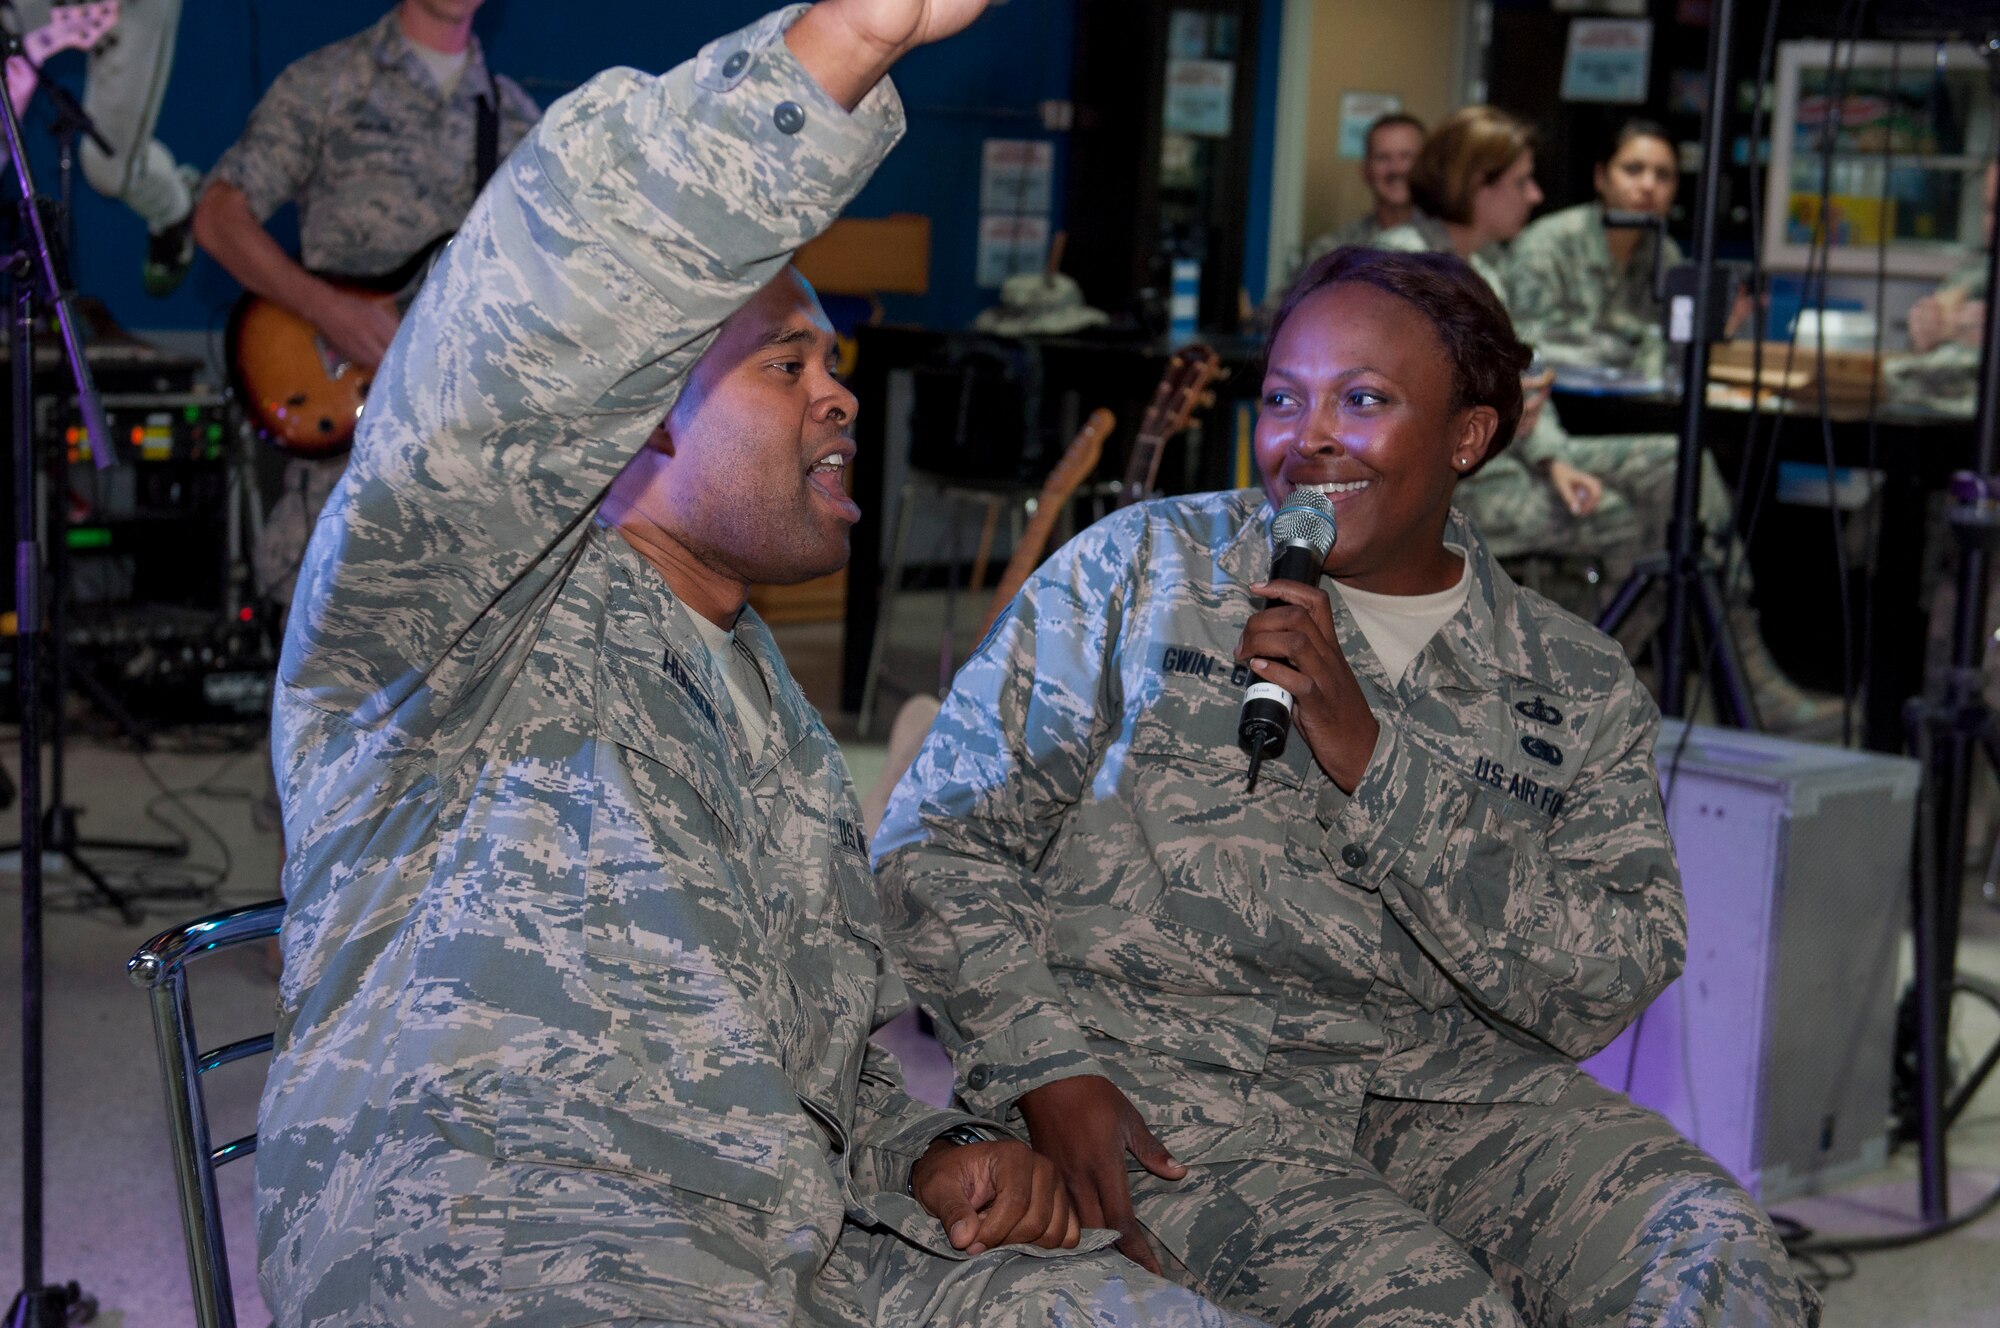 Capt. Matthew Hudson got an opportunity to sing with Tech. Sgt. Keisha Gwin-Goodwin, lead vocalist with Starlifter, during a performance held at The Rock June 17, 2014. Starlifter is a seven-member group of talented musicians that performs in virtually every musical idiom and was here in support of Operation Enduring Freedom. (U.S. Air Force photo by Senior Master Sgt. Allison Day)